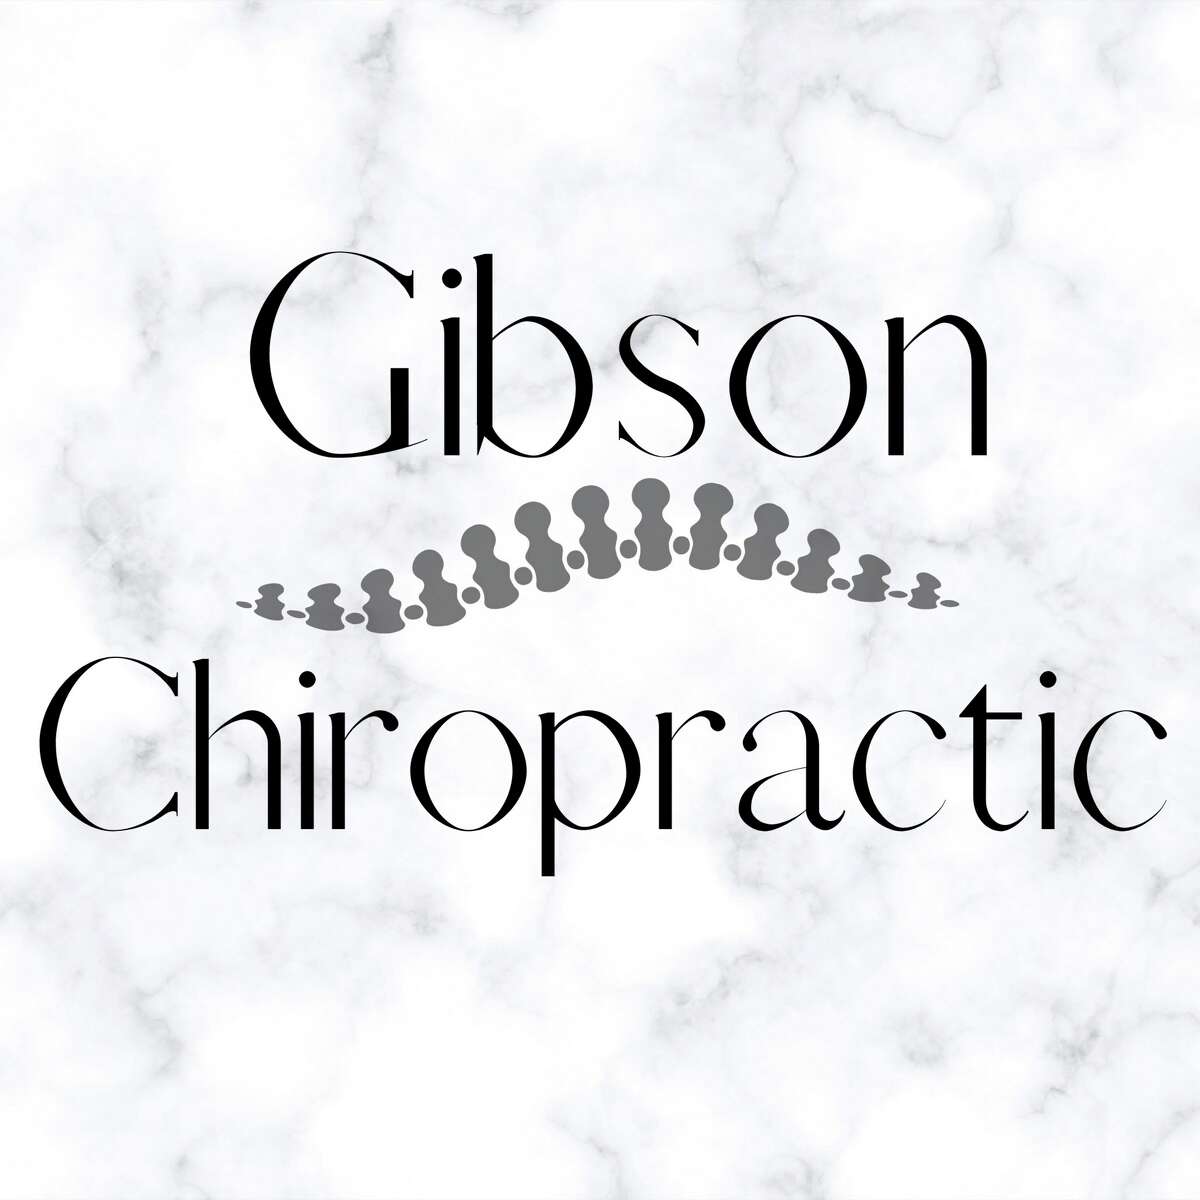 Best Chiropractor Dr. David Gibson, Gibson Chiropractic, PLLC, 2315 E Saunders St